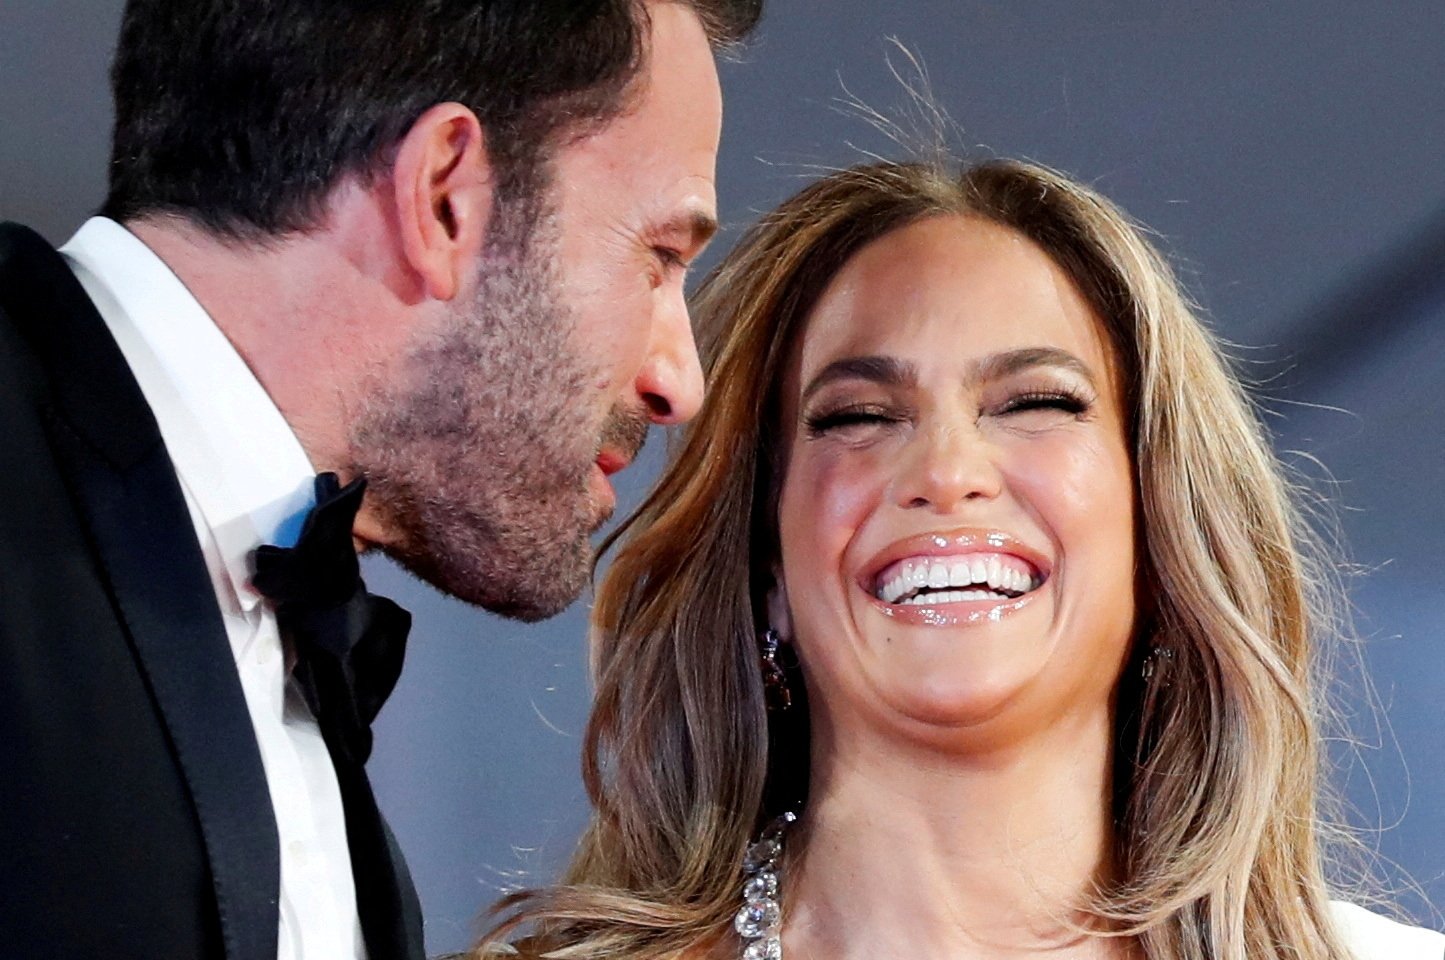 Jennifer Lopez and Ben Affleck attend the premiere screening of the film 'The Last Duel' at the 78th Venice Film Festival, Italy, Sept.10, 2021. (REUTERS)